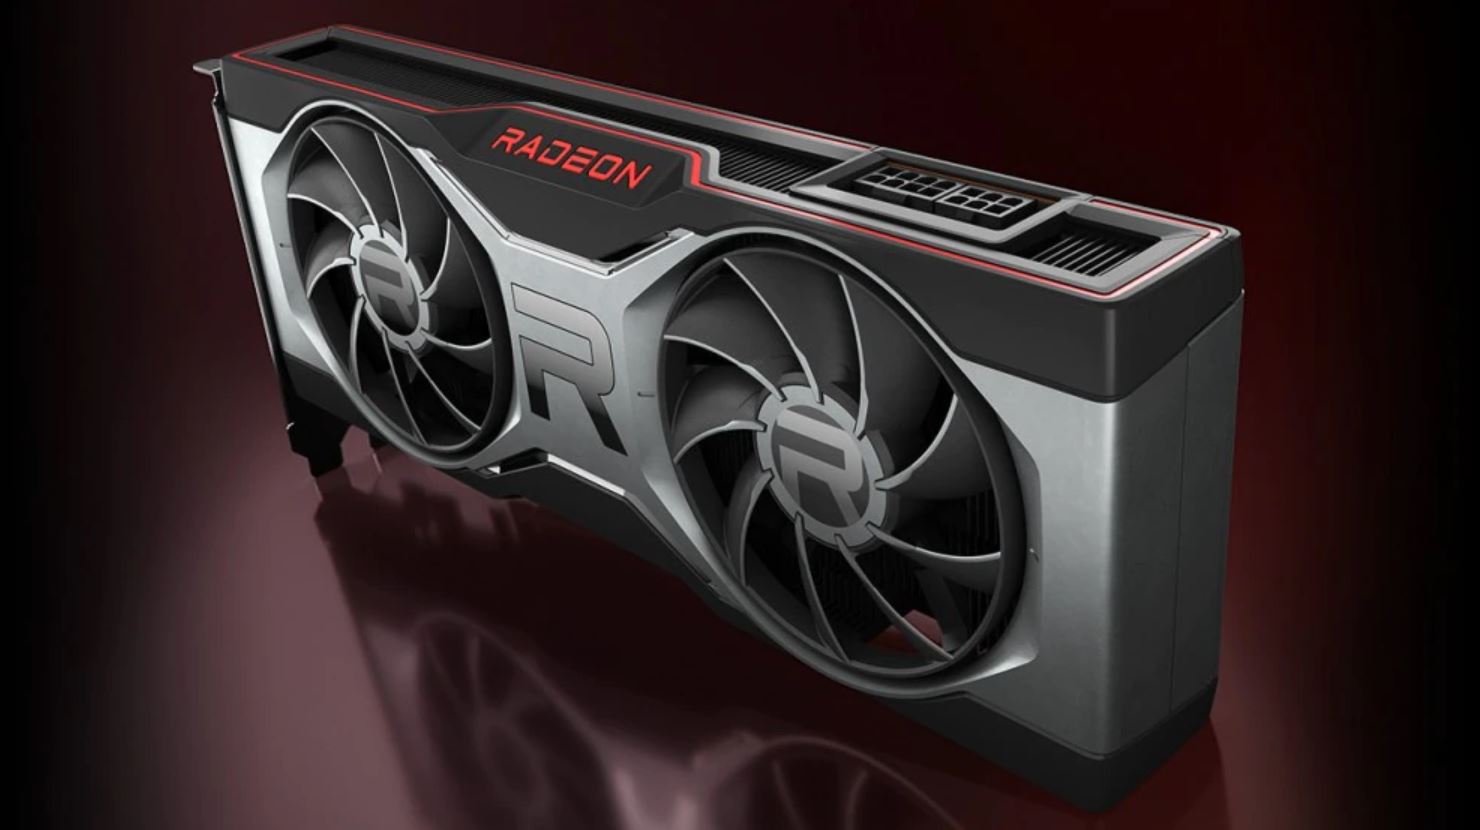 Media asset in full size related to 3dfxzone.it news item entitled as follows: AMD rilascia il driver grafico Radeon Software Adrenalin 2020 Edition 21.3.1 | Image Name: news31821_AMD-Radeon-RX-6700-XT_1.jpg